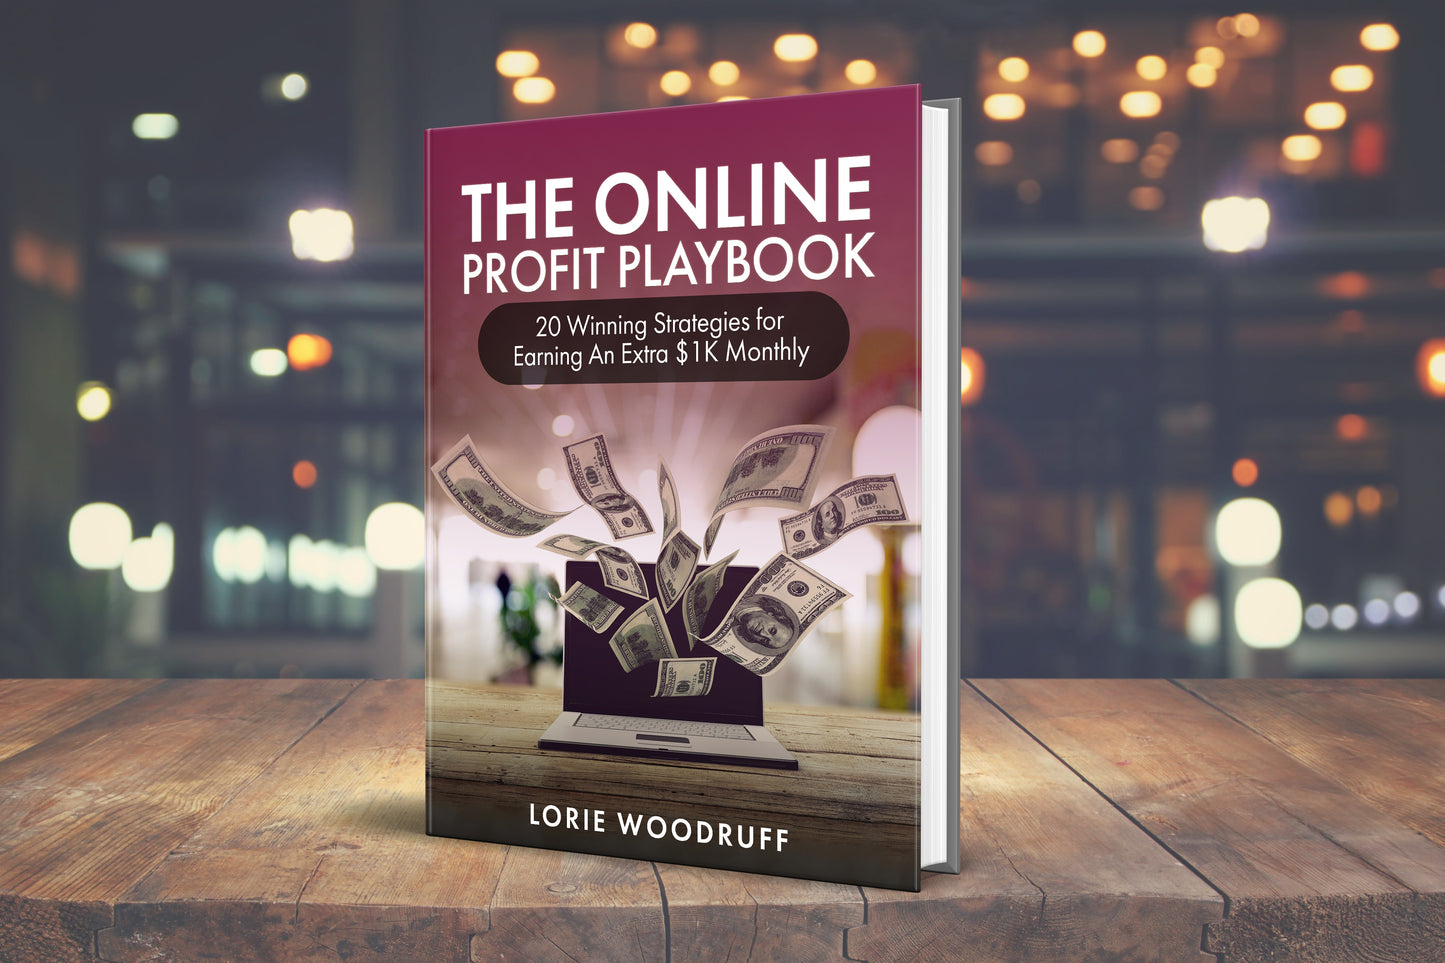 Online Profit Playbook: 20 Winning Strategies For Earning $1K Monthly